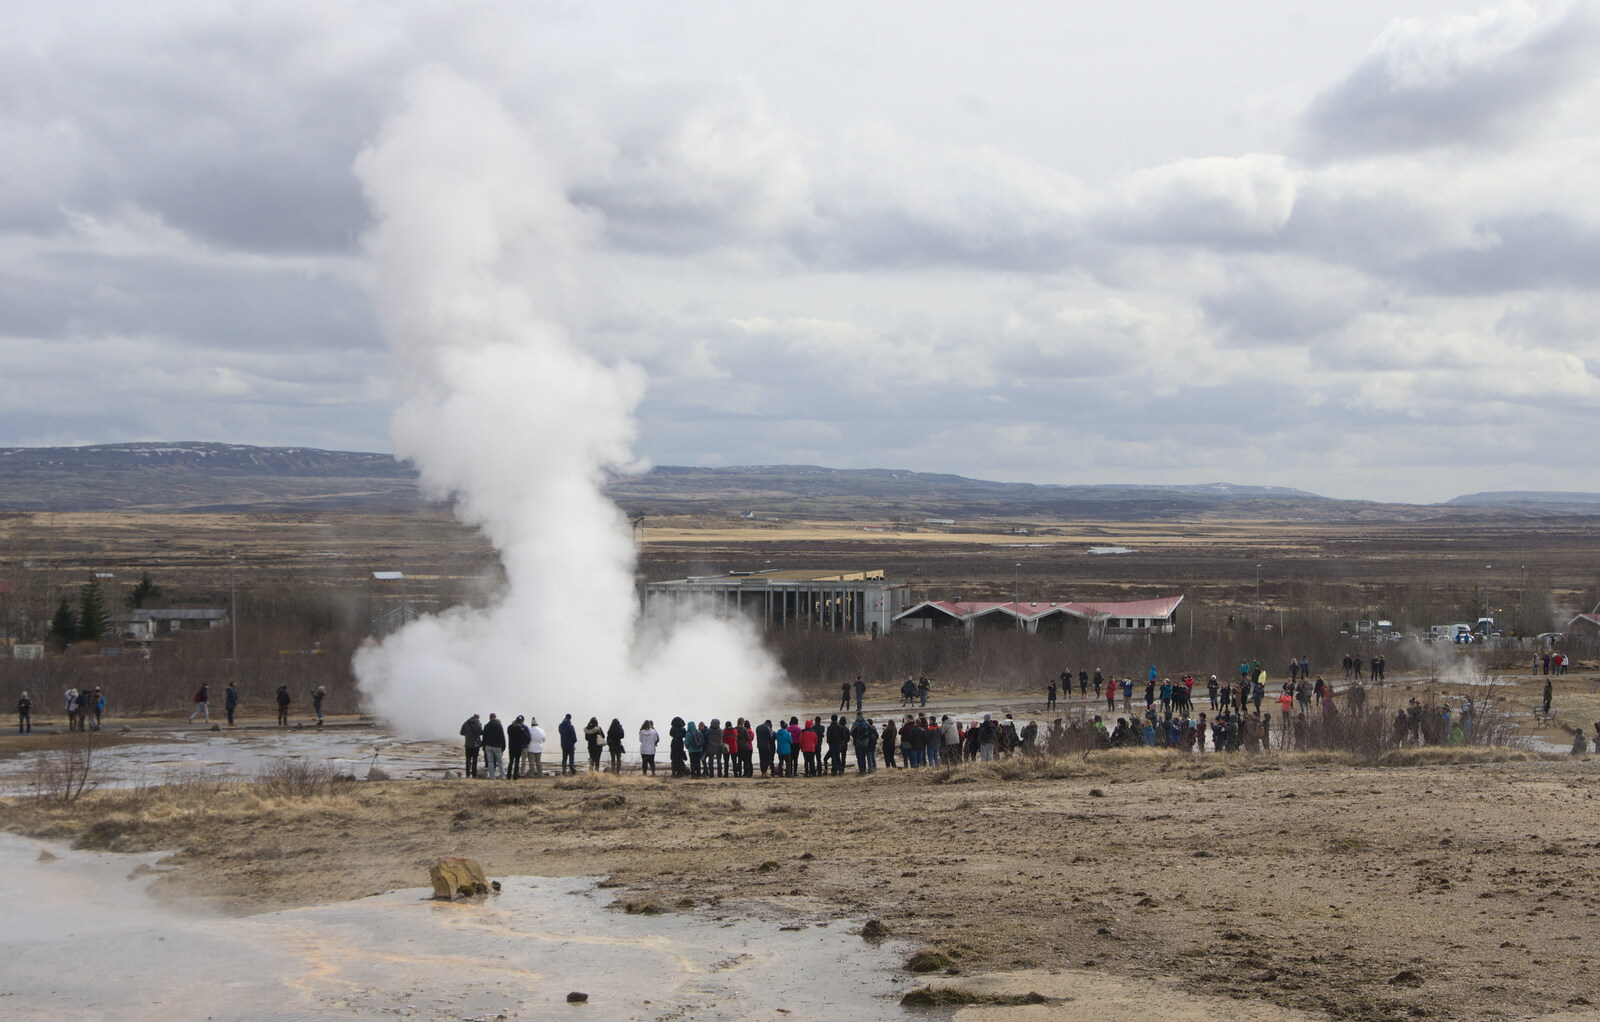 The geyser looks like a rocket launch from The Golden Circle of Ísland, Iceland - 22nd April 2017